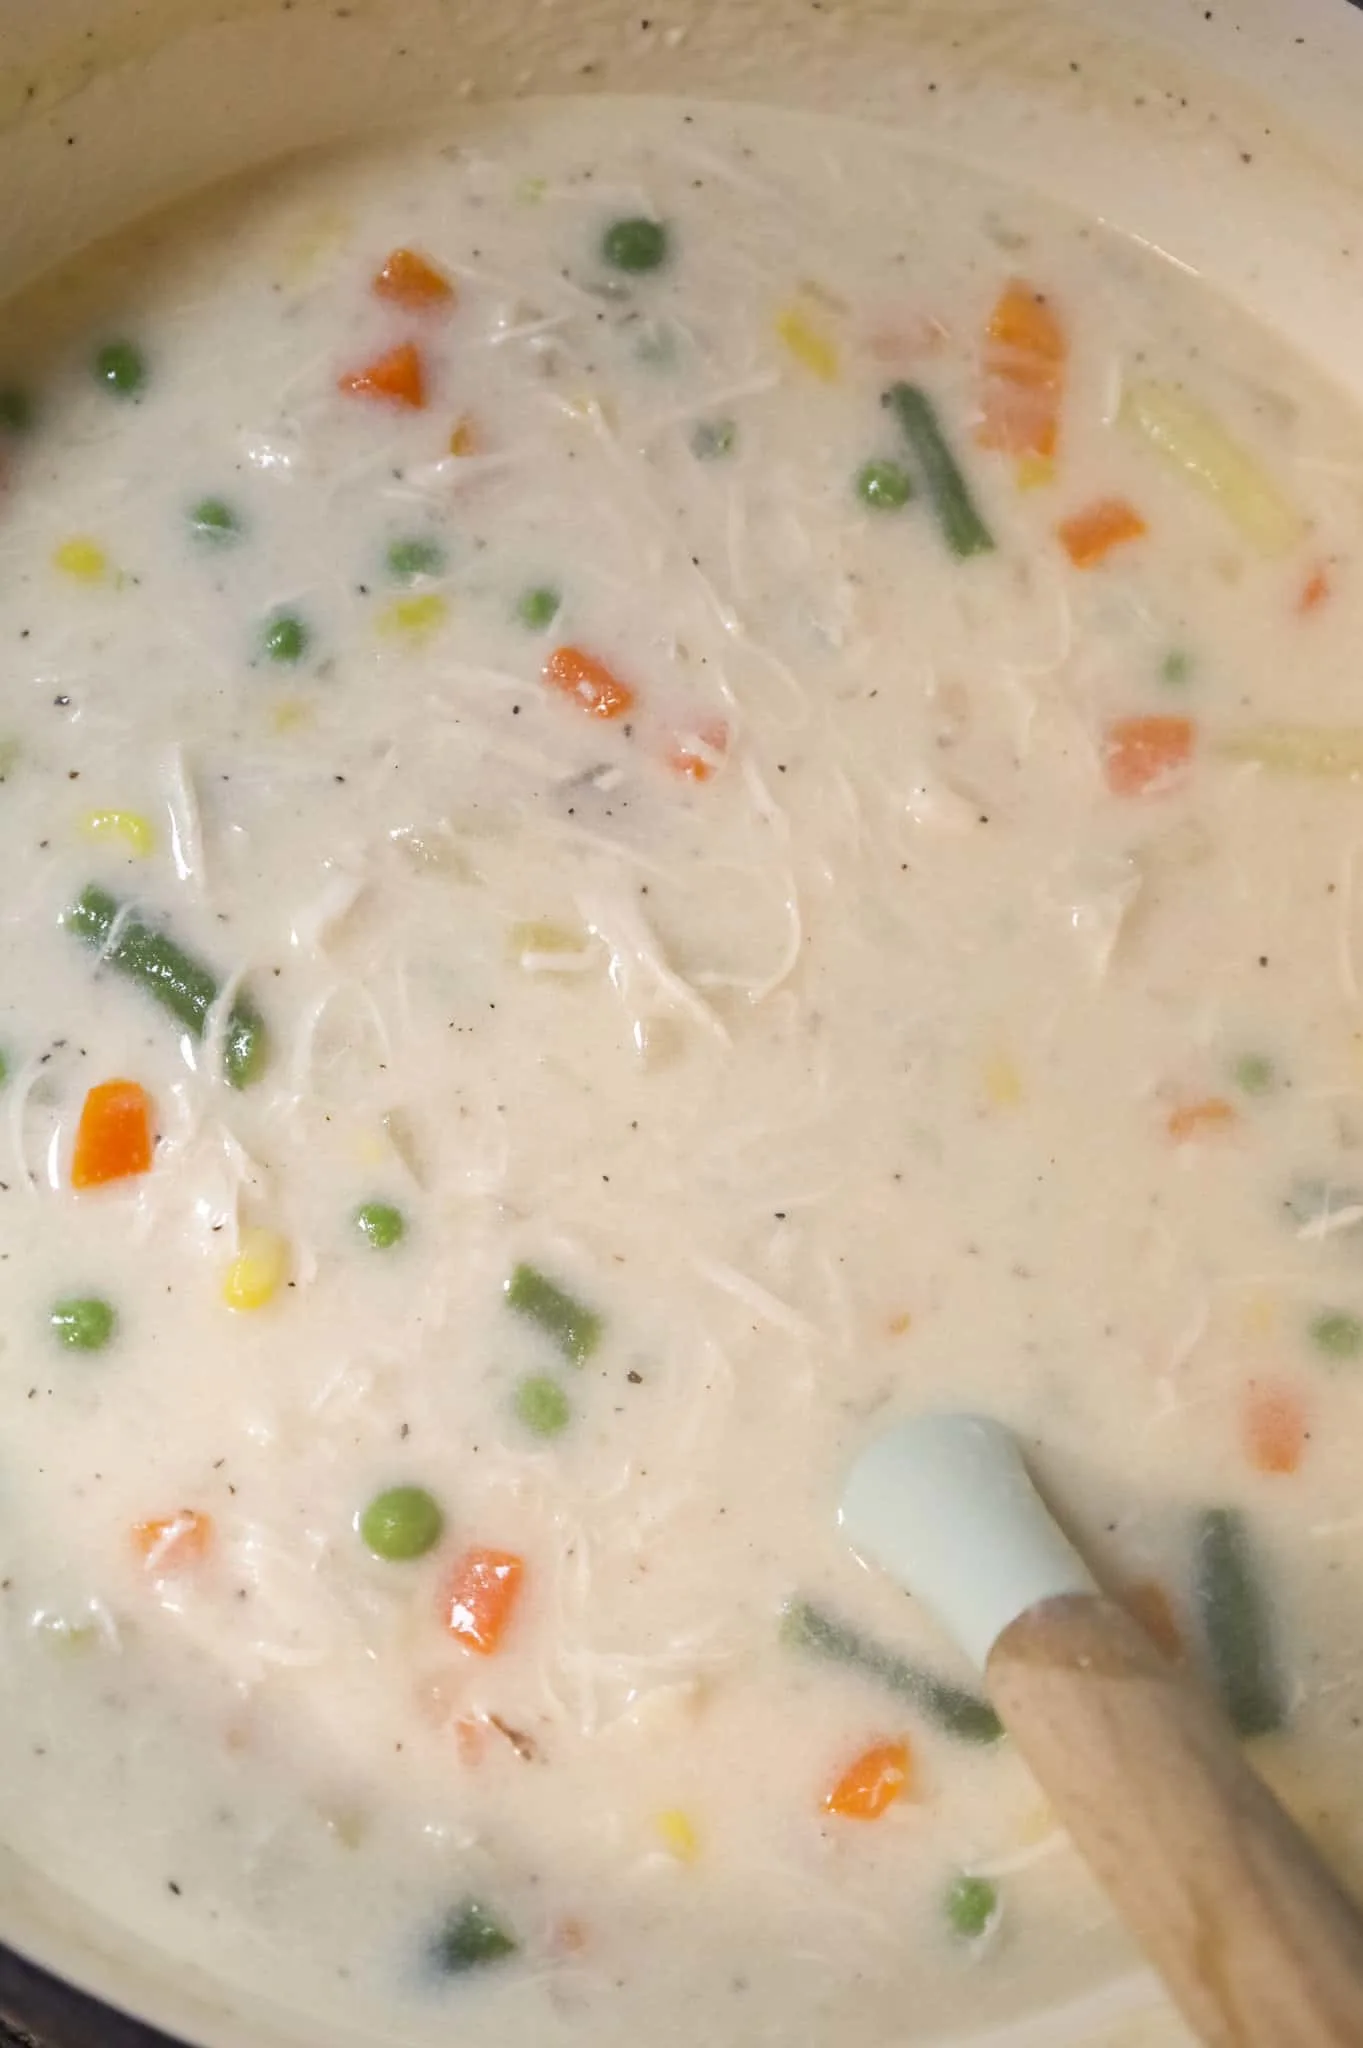 stirring vegetables and shredded chicken into cream soup